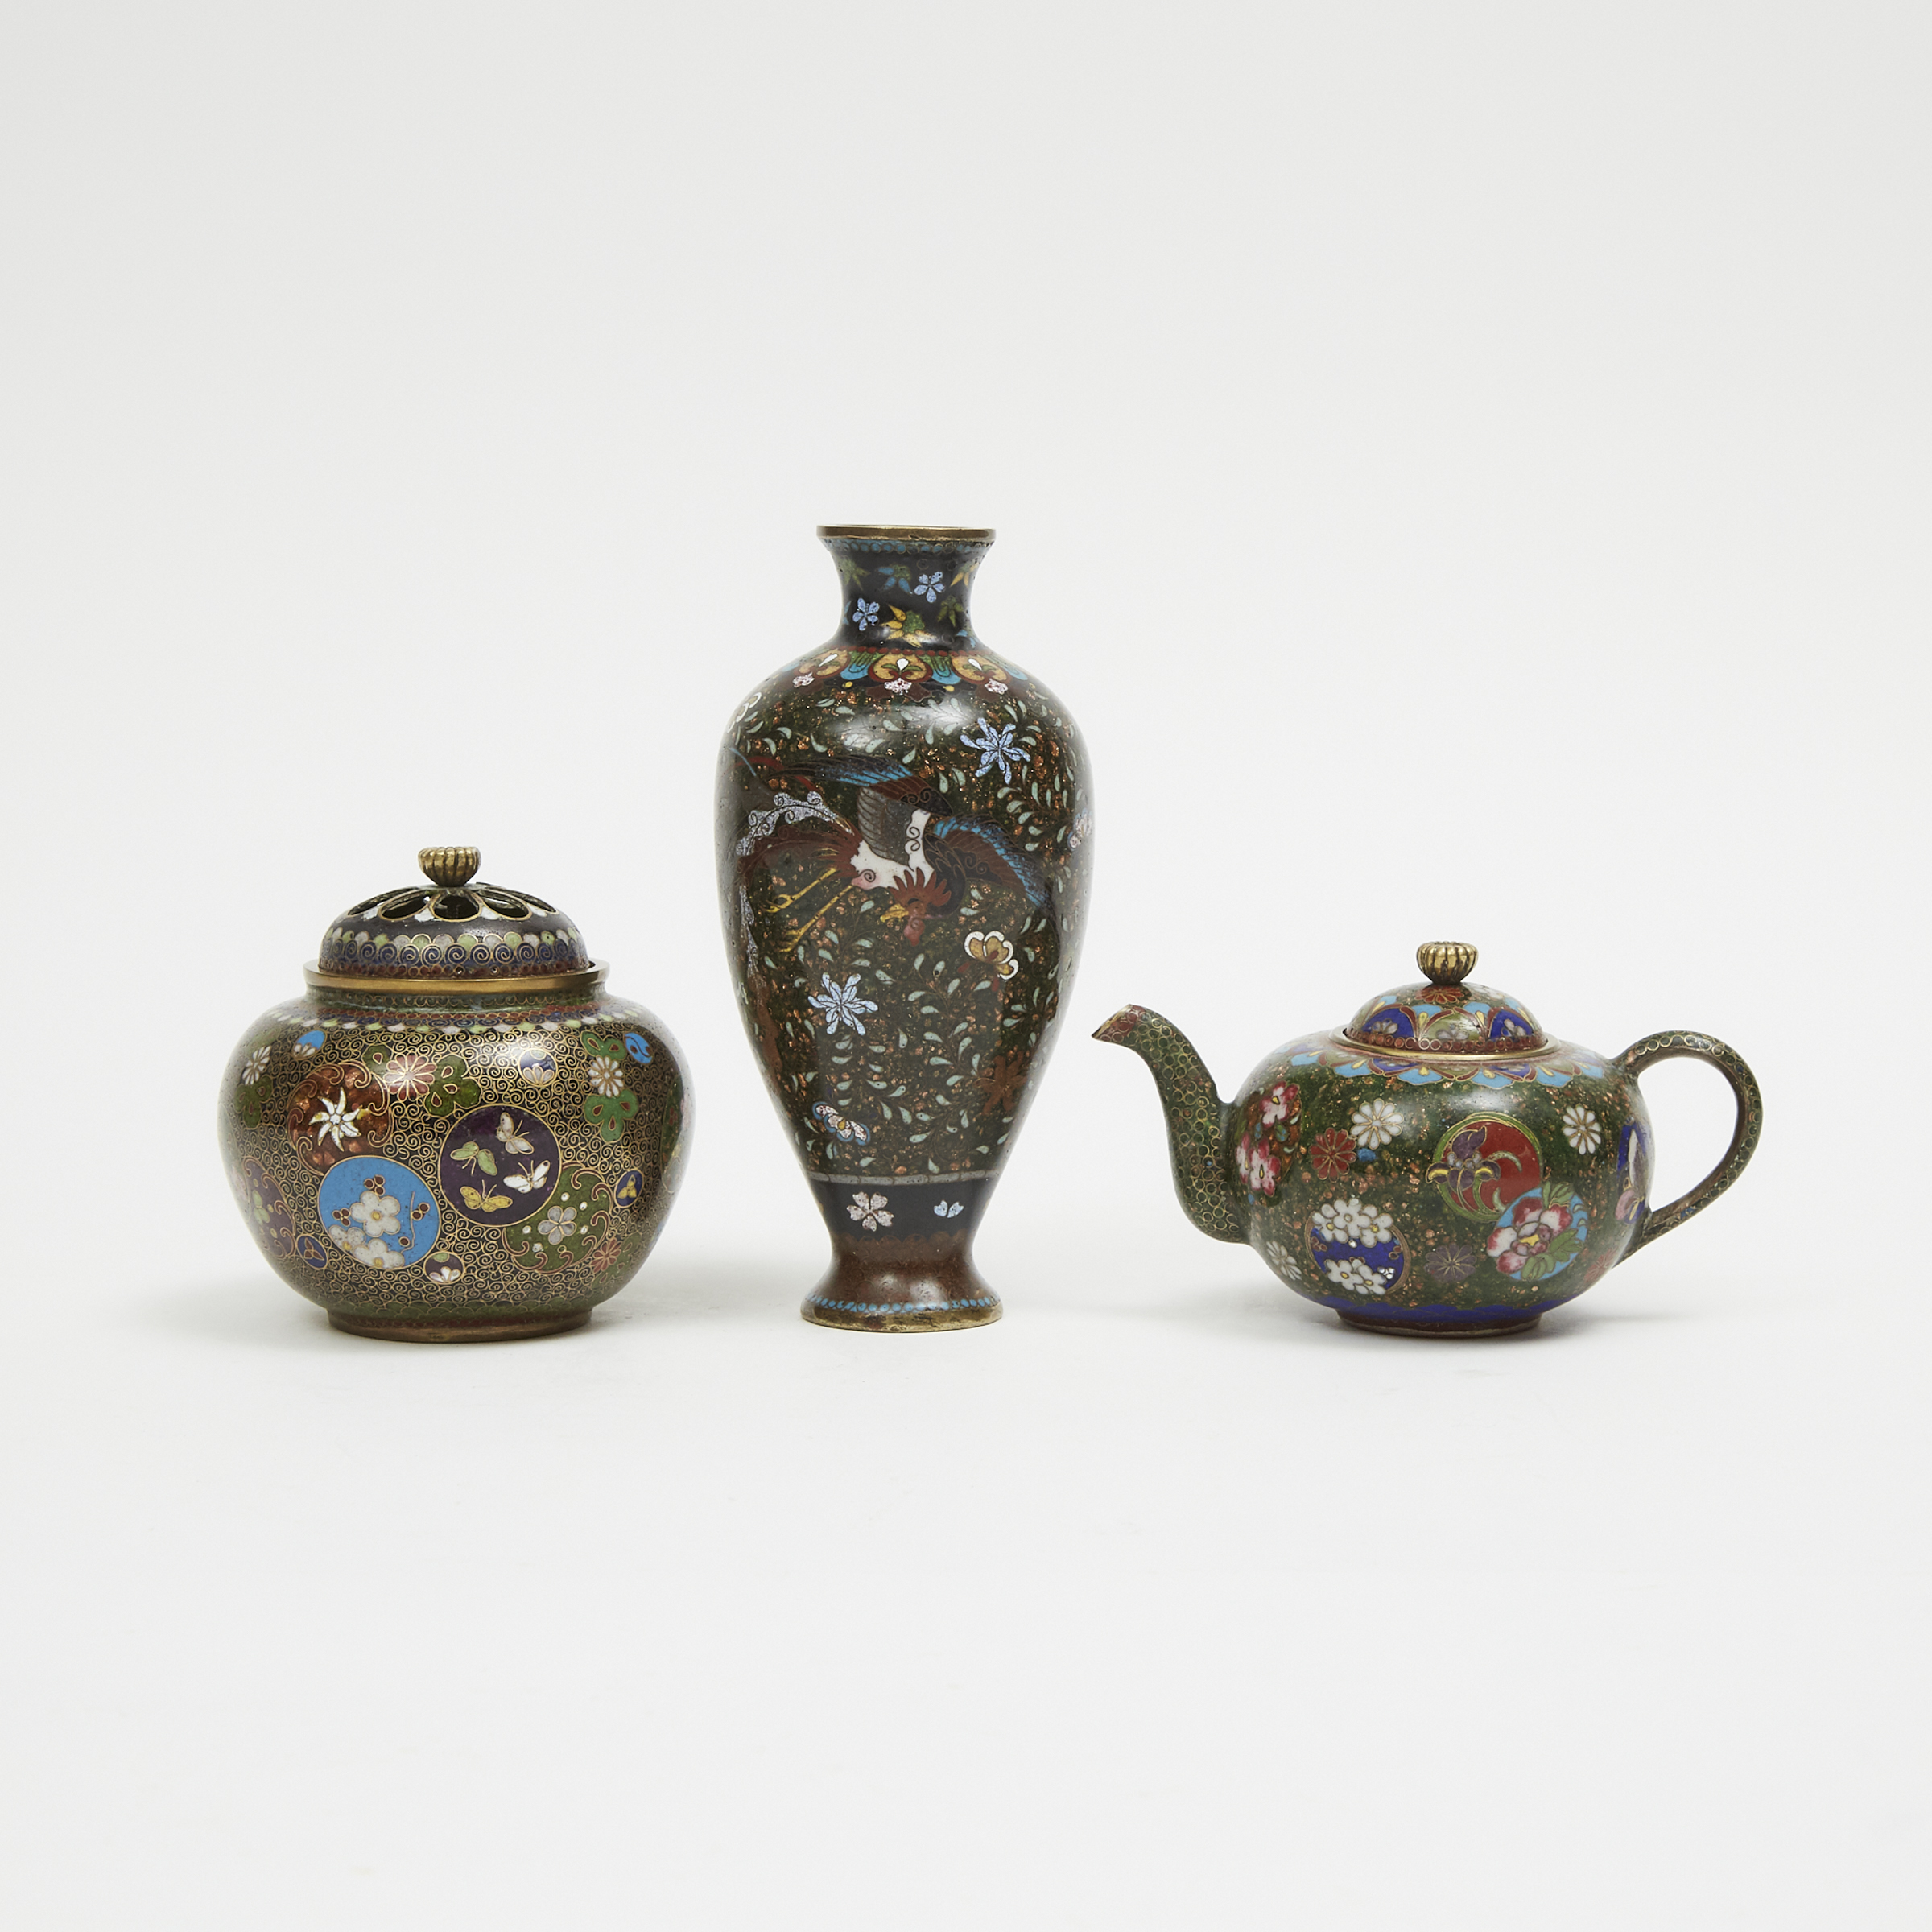 A Group of Three Miniature Cloisonné Wares